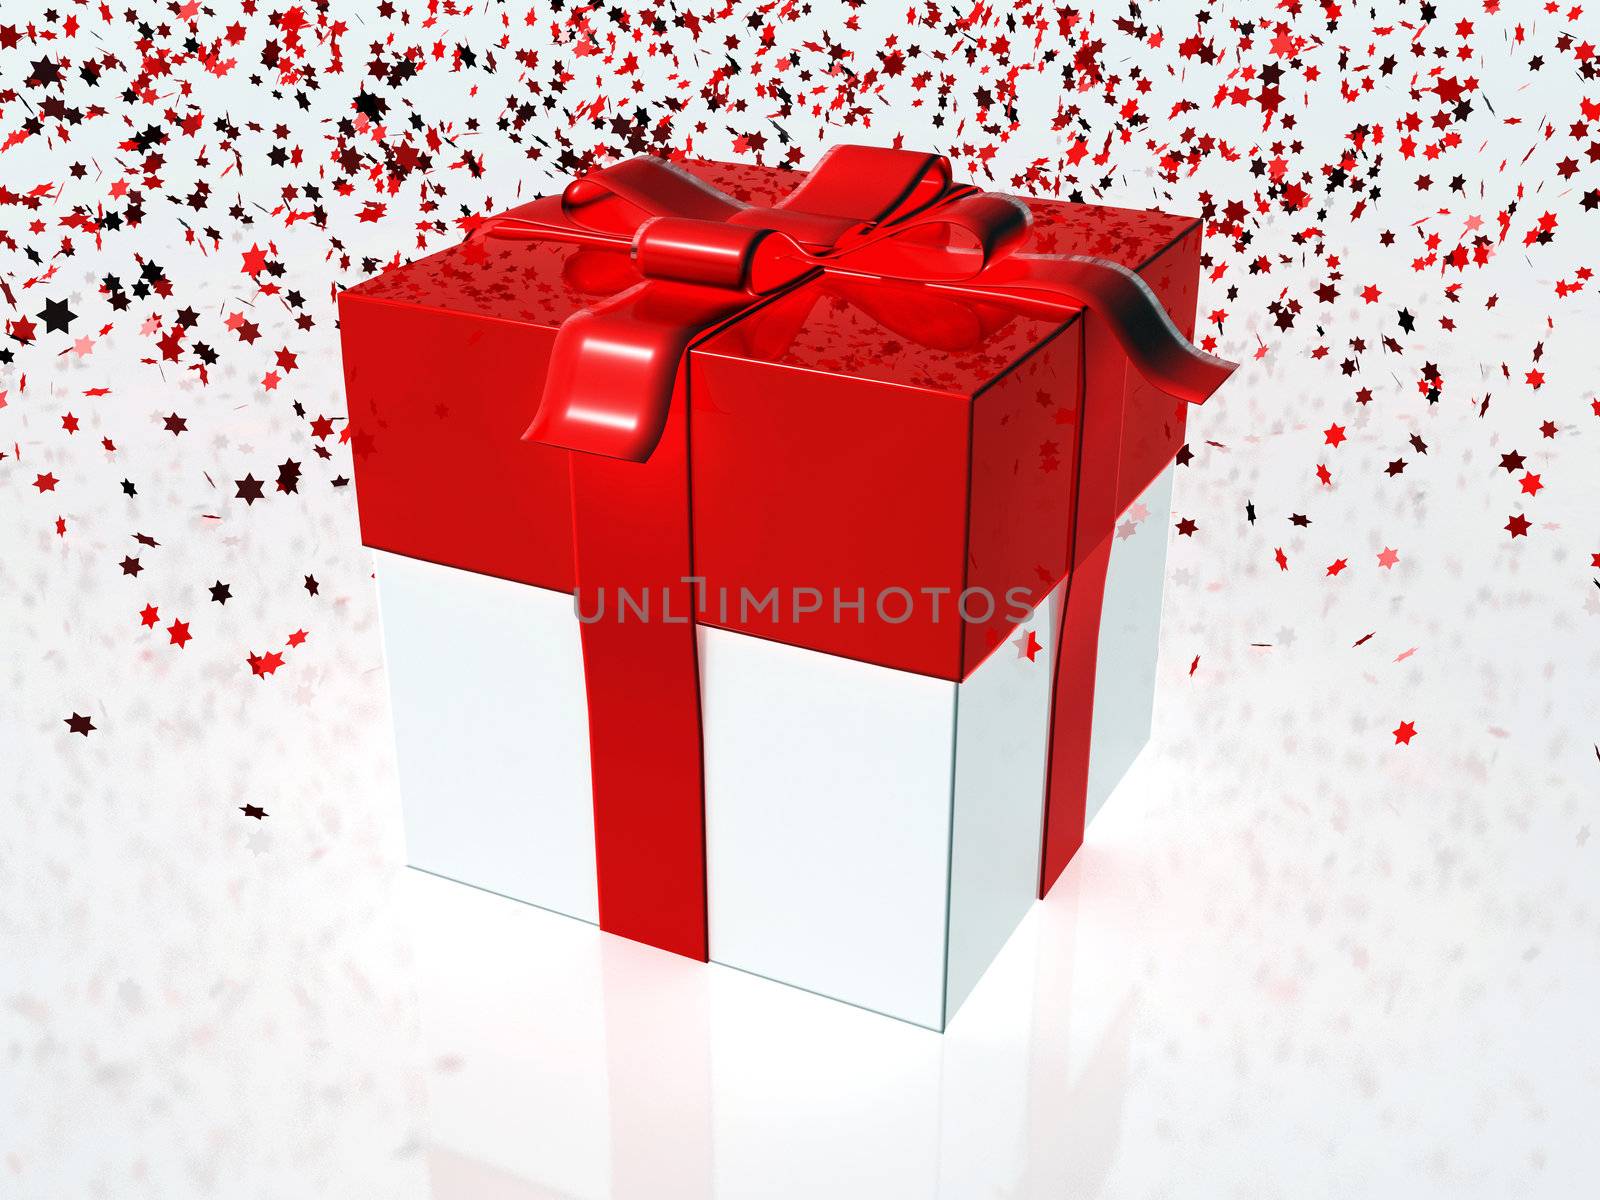 Red and white gift box with red ribbon